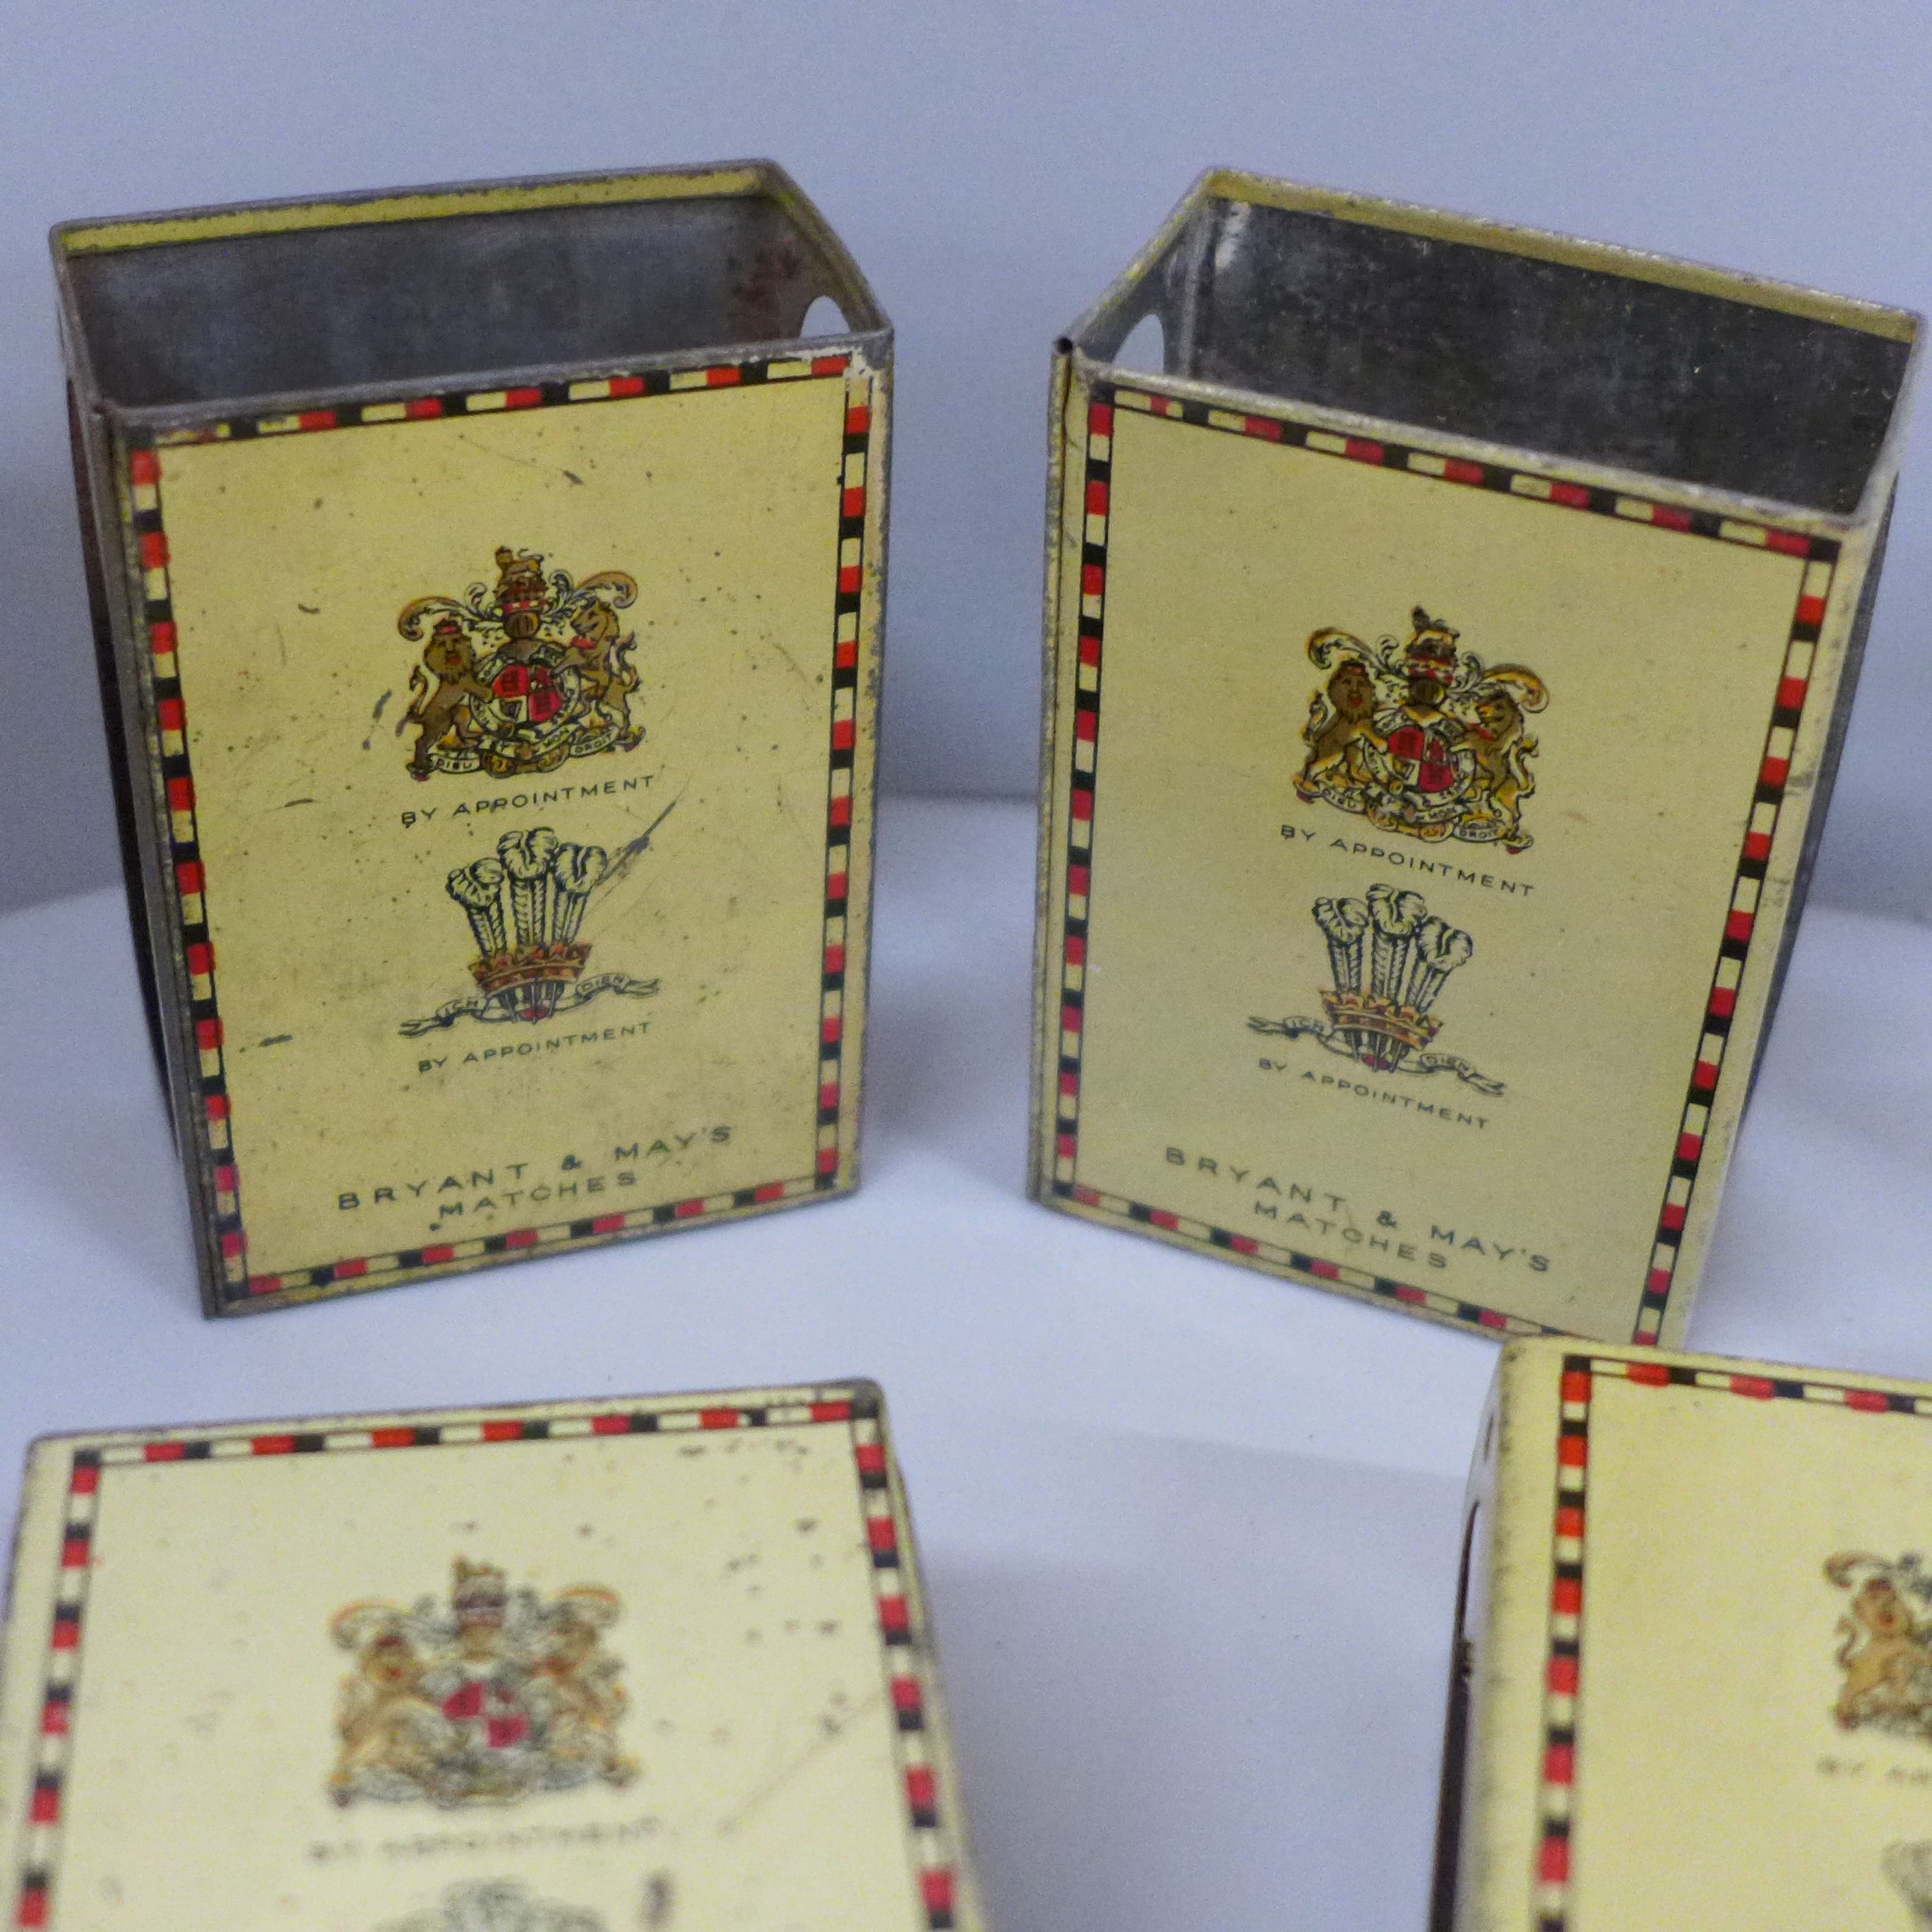 Eight Bryant & May's tin plate matchbox covers and other boxes of matches - Image 2 of 2